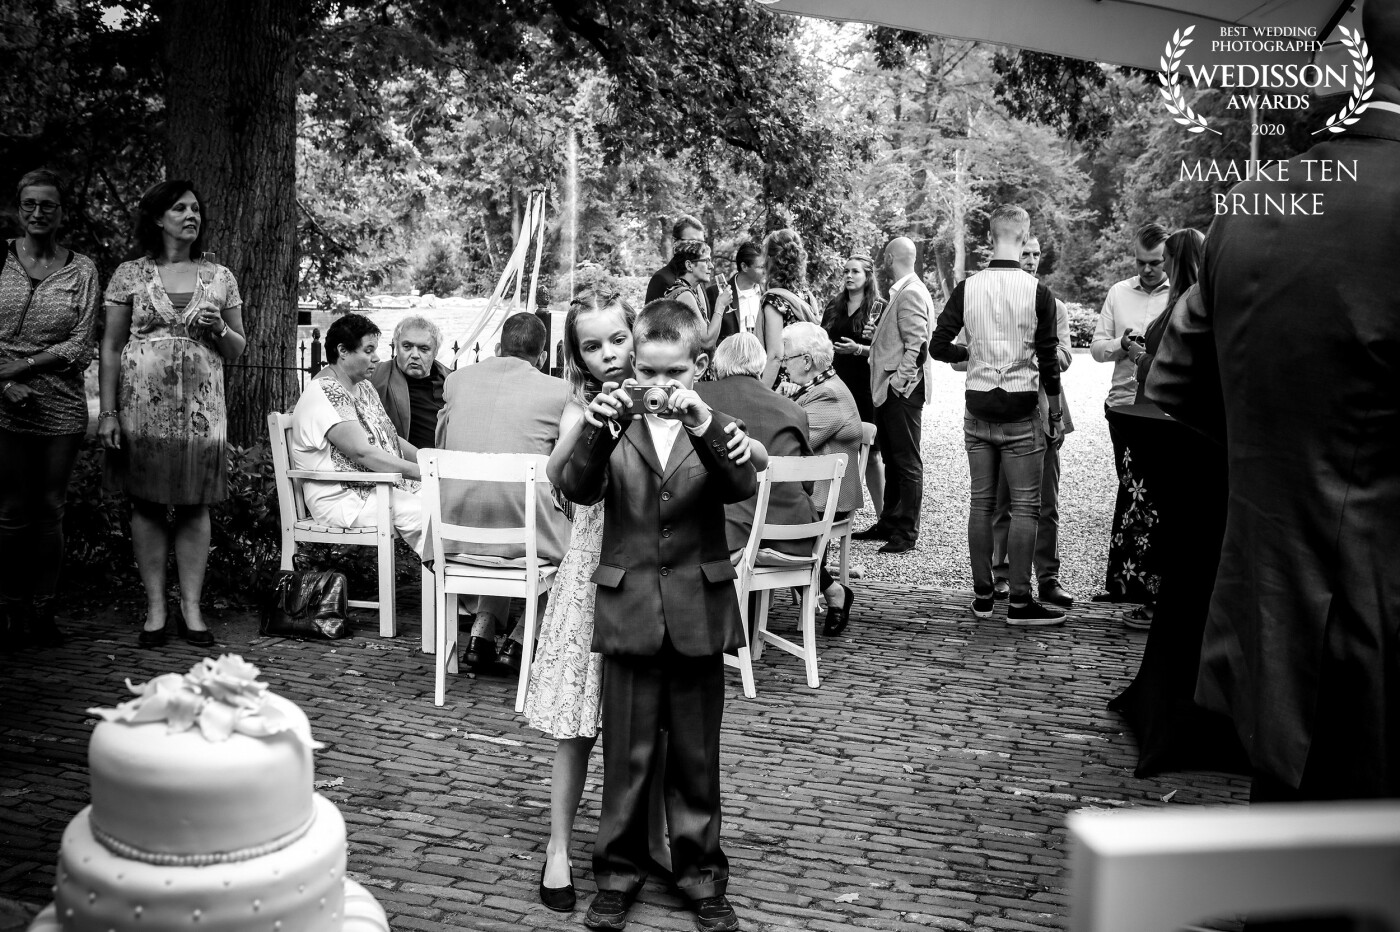 These bridal children also wanted to take nice pictures of the wedding day and the fantastic wedding cake. And so they did! A wonderful moment to secretly capture.